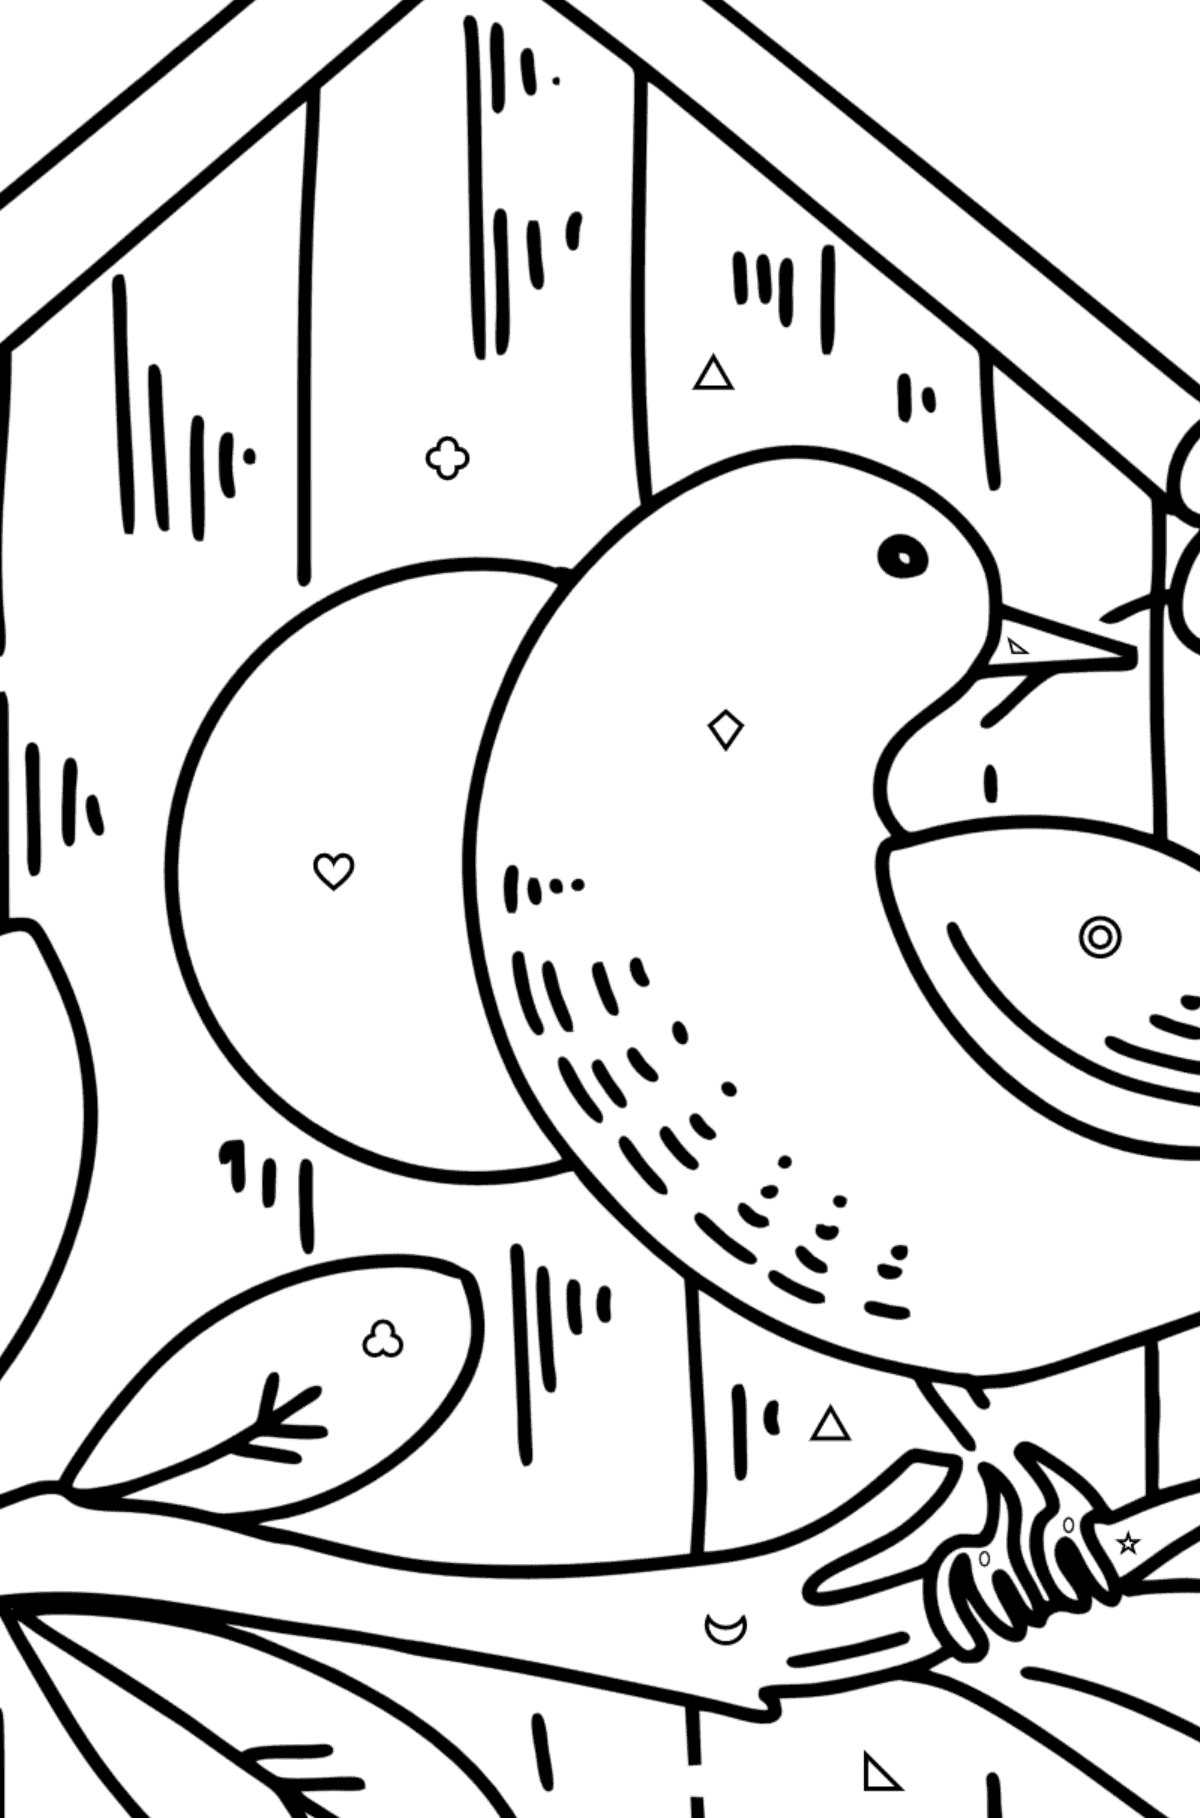 Starling at the Birdhouse coloring page - Coloring by Geometric Shapes for Kids